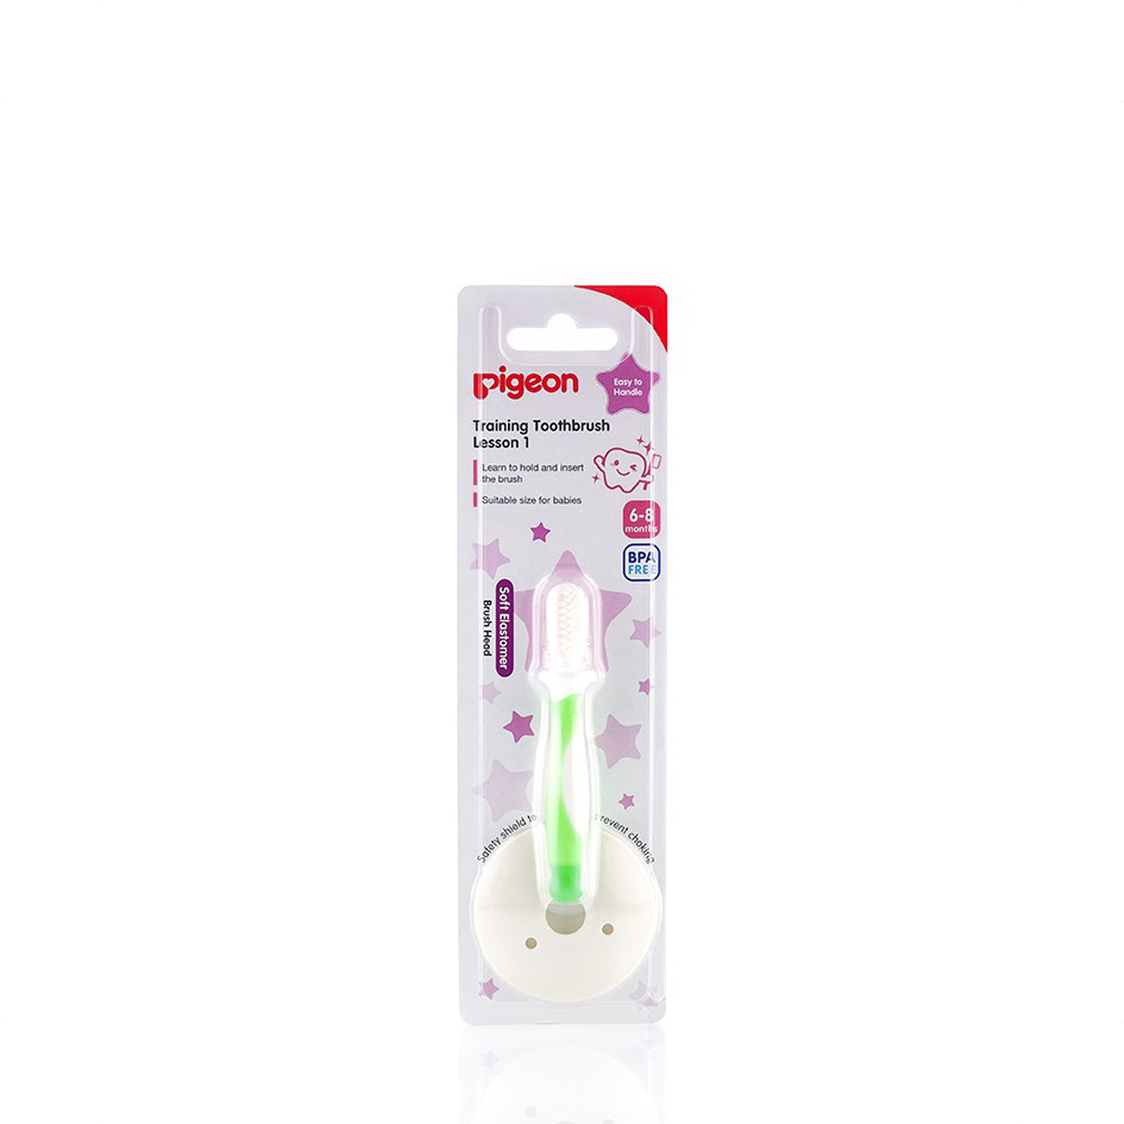 Pigeon Training Toothbrush Lesson 1 Green